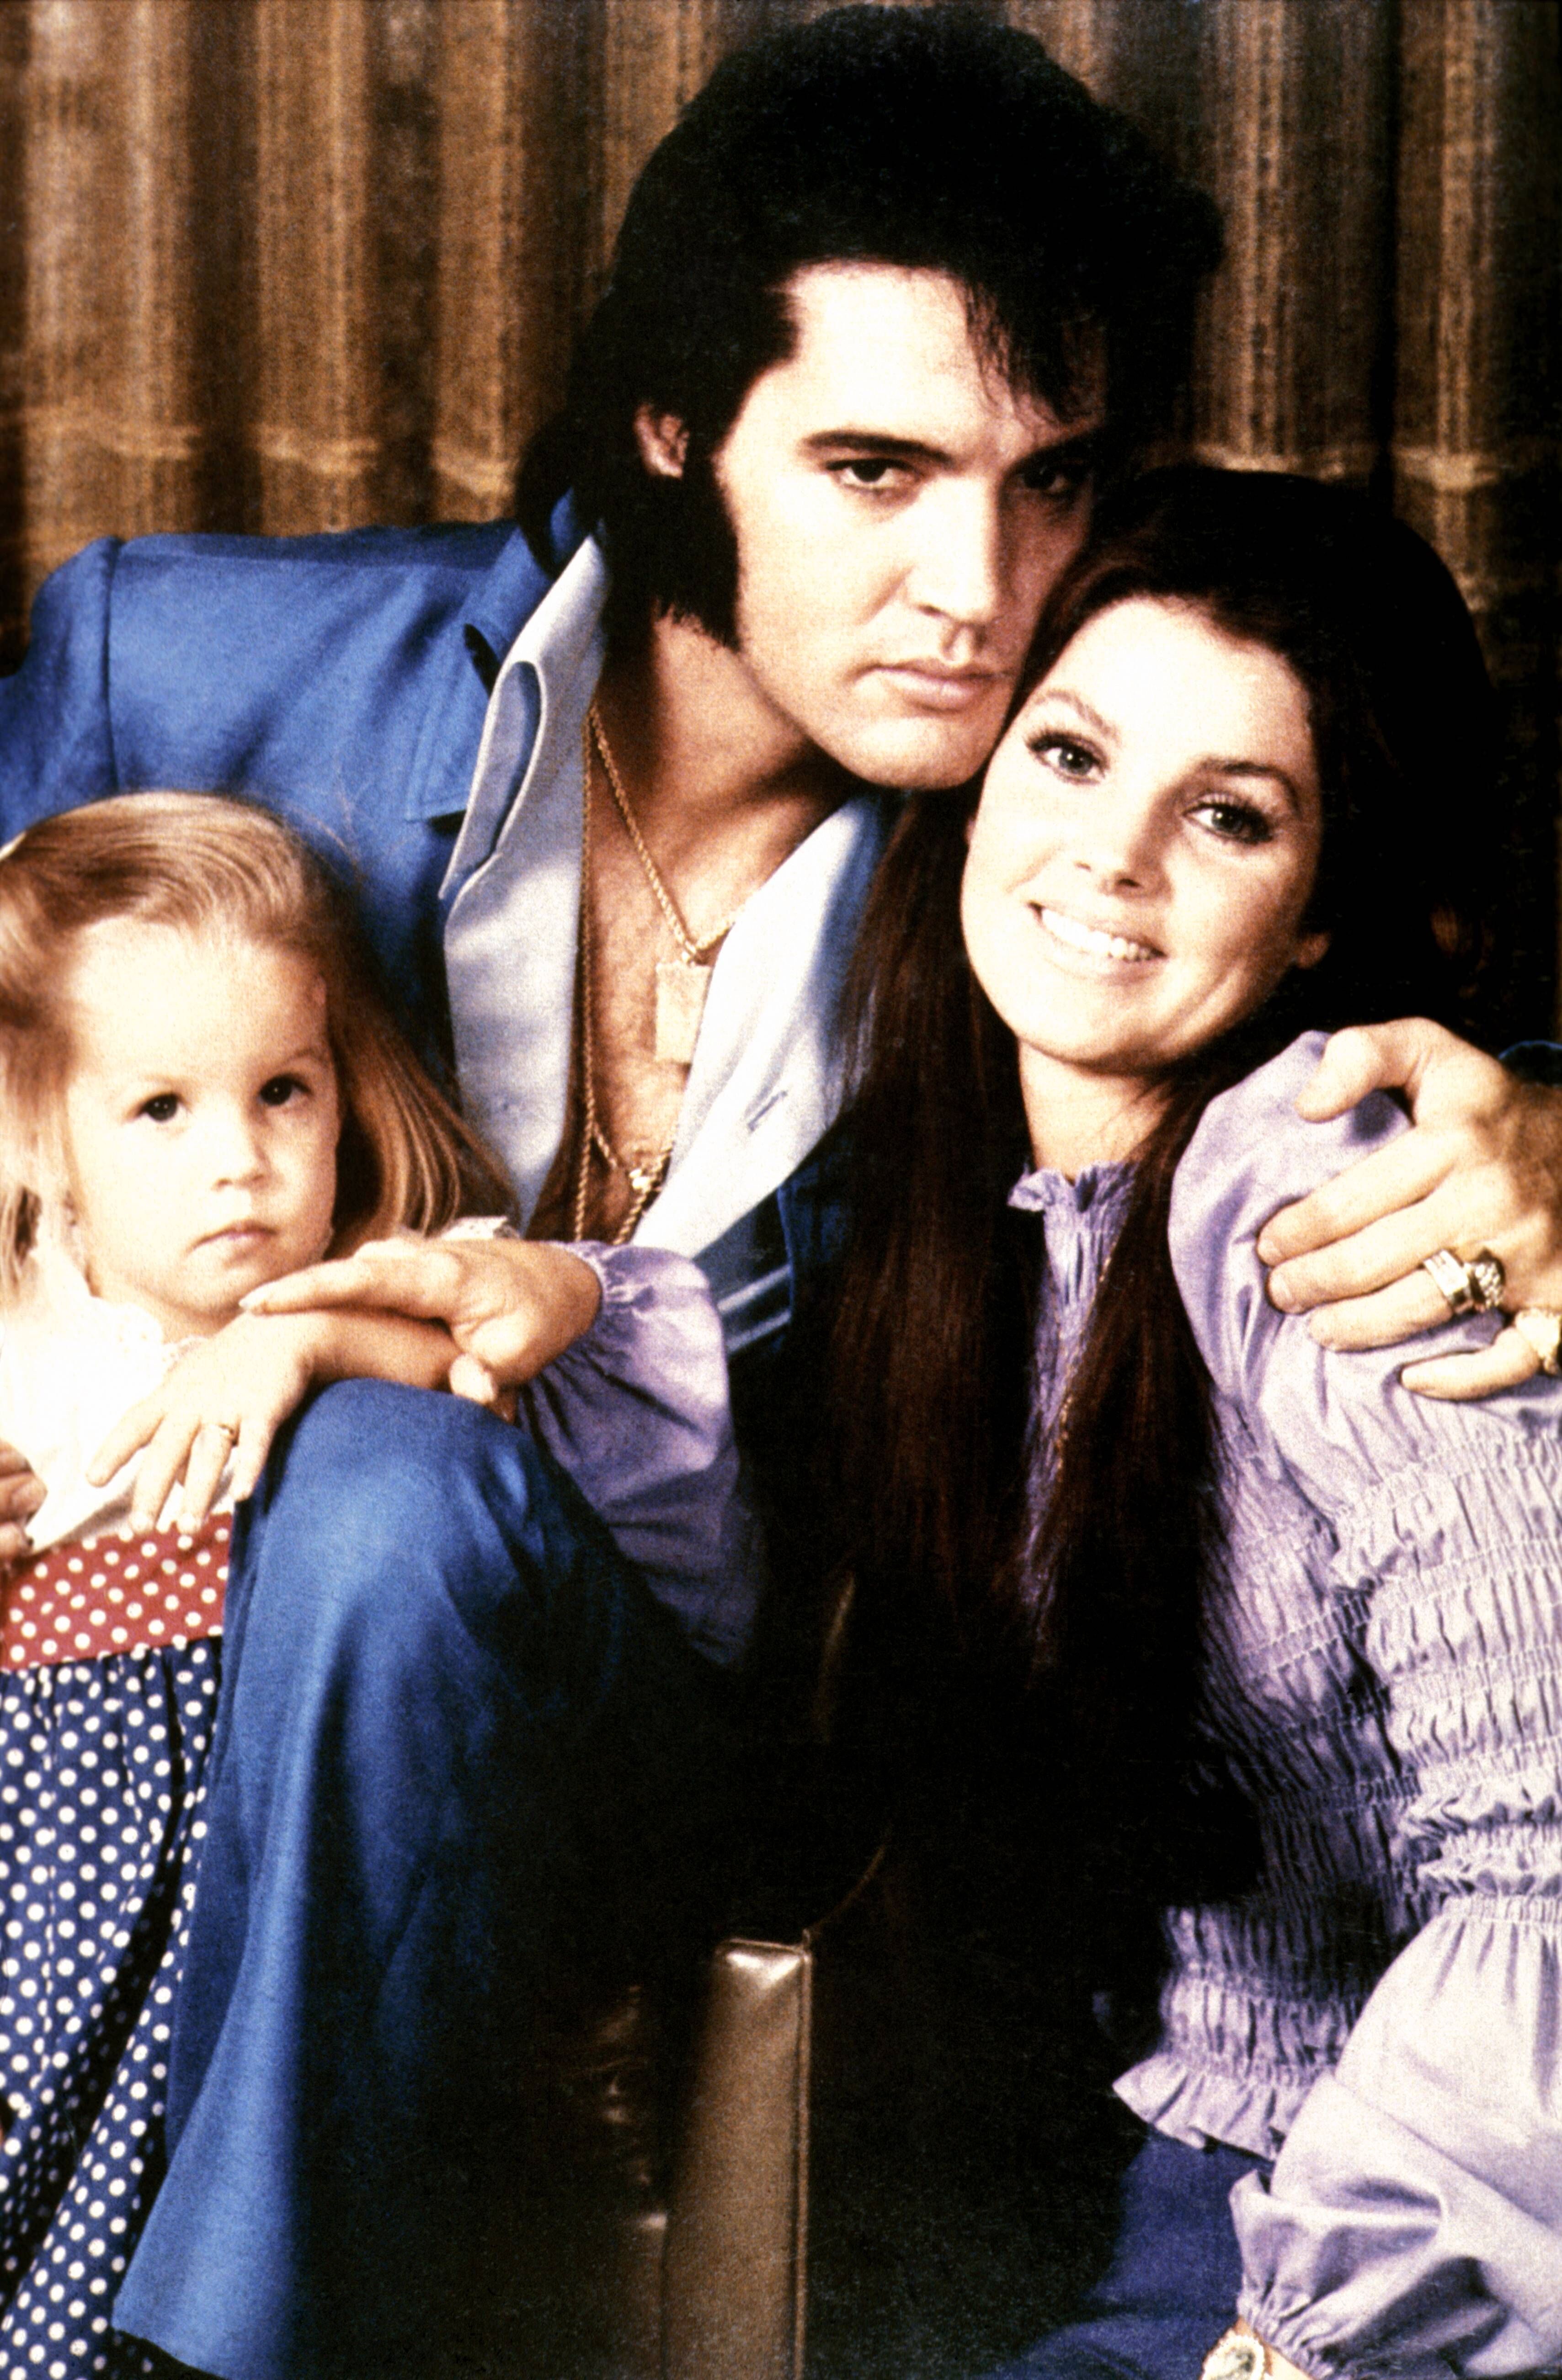 Elvis Presley, with his wife Priscilla and daughter Lisa-Marie circa 1970 | Source: Getty Images